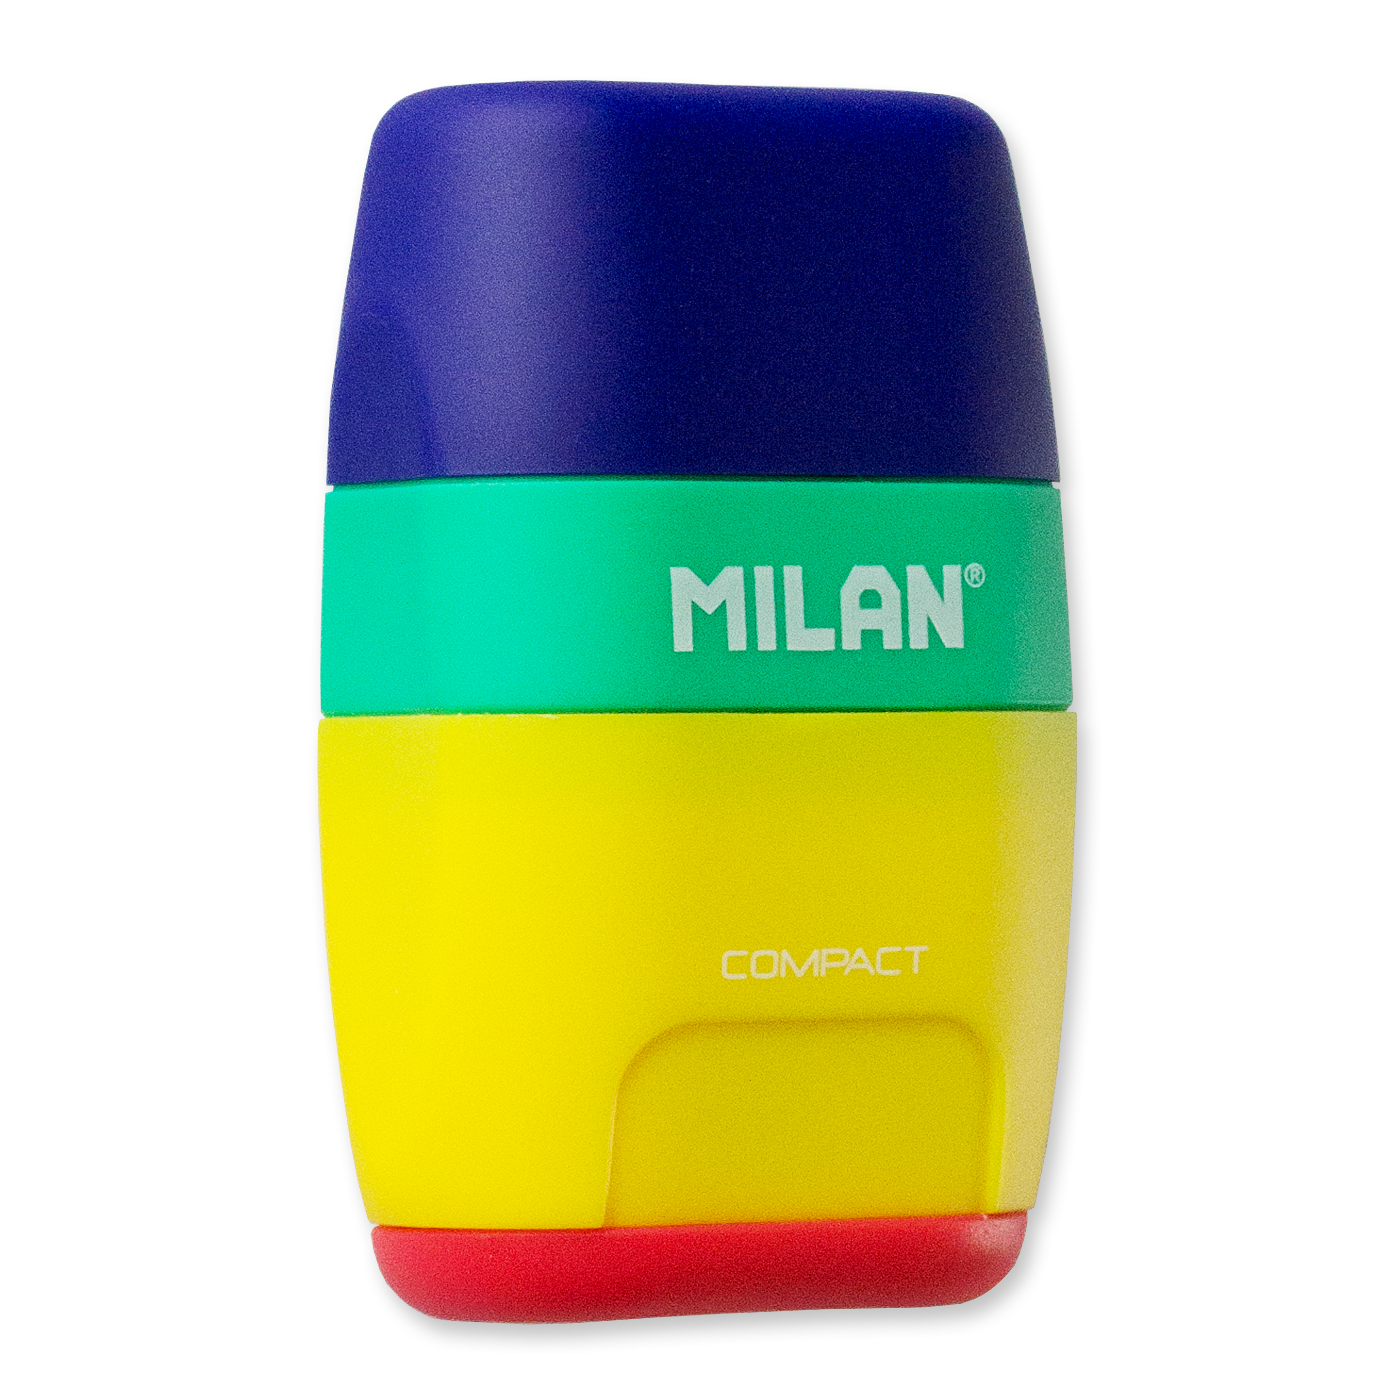 Milan Compact 2 in 1 Eraser and Sharpener Double Hole with Container Assorted